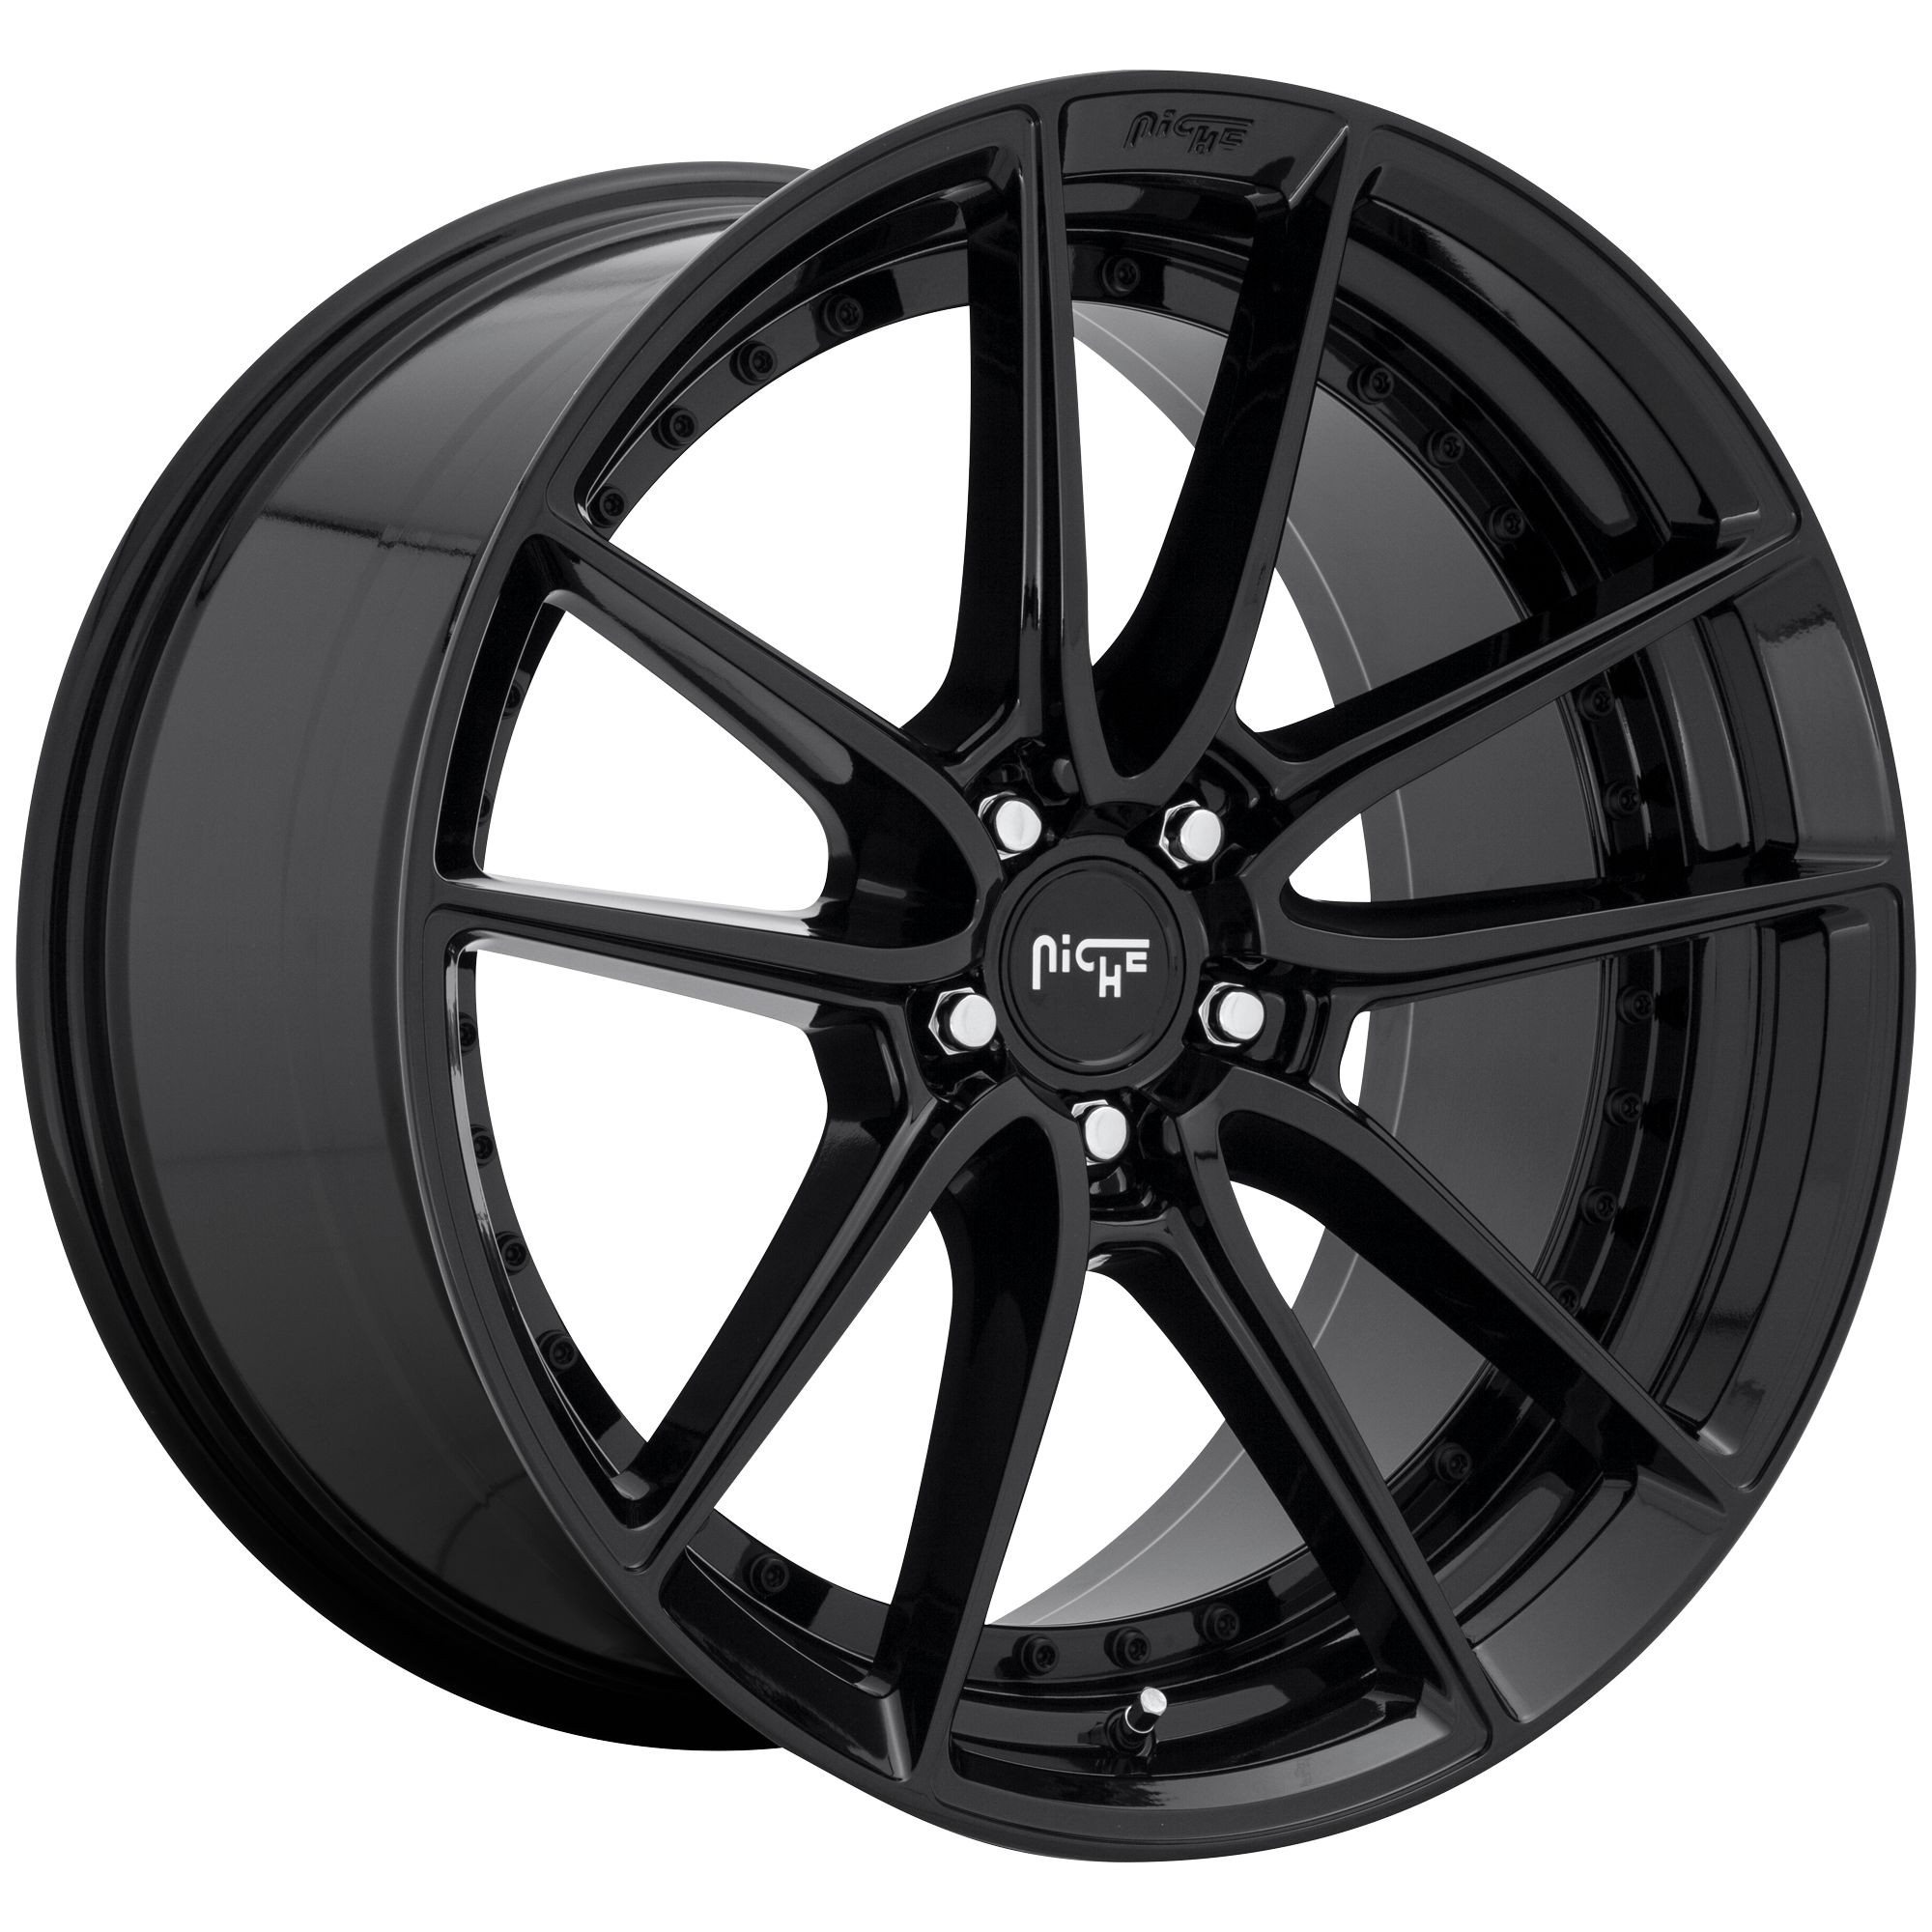 DFS 18x9.5 5x120.00 GLOSS BLACK (35 mm) - Tires and Engine Performance